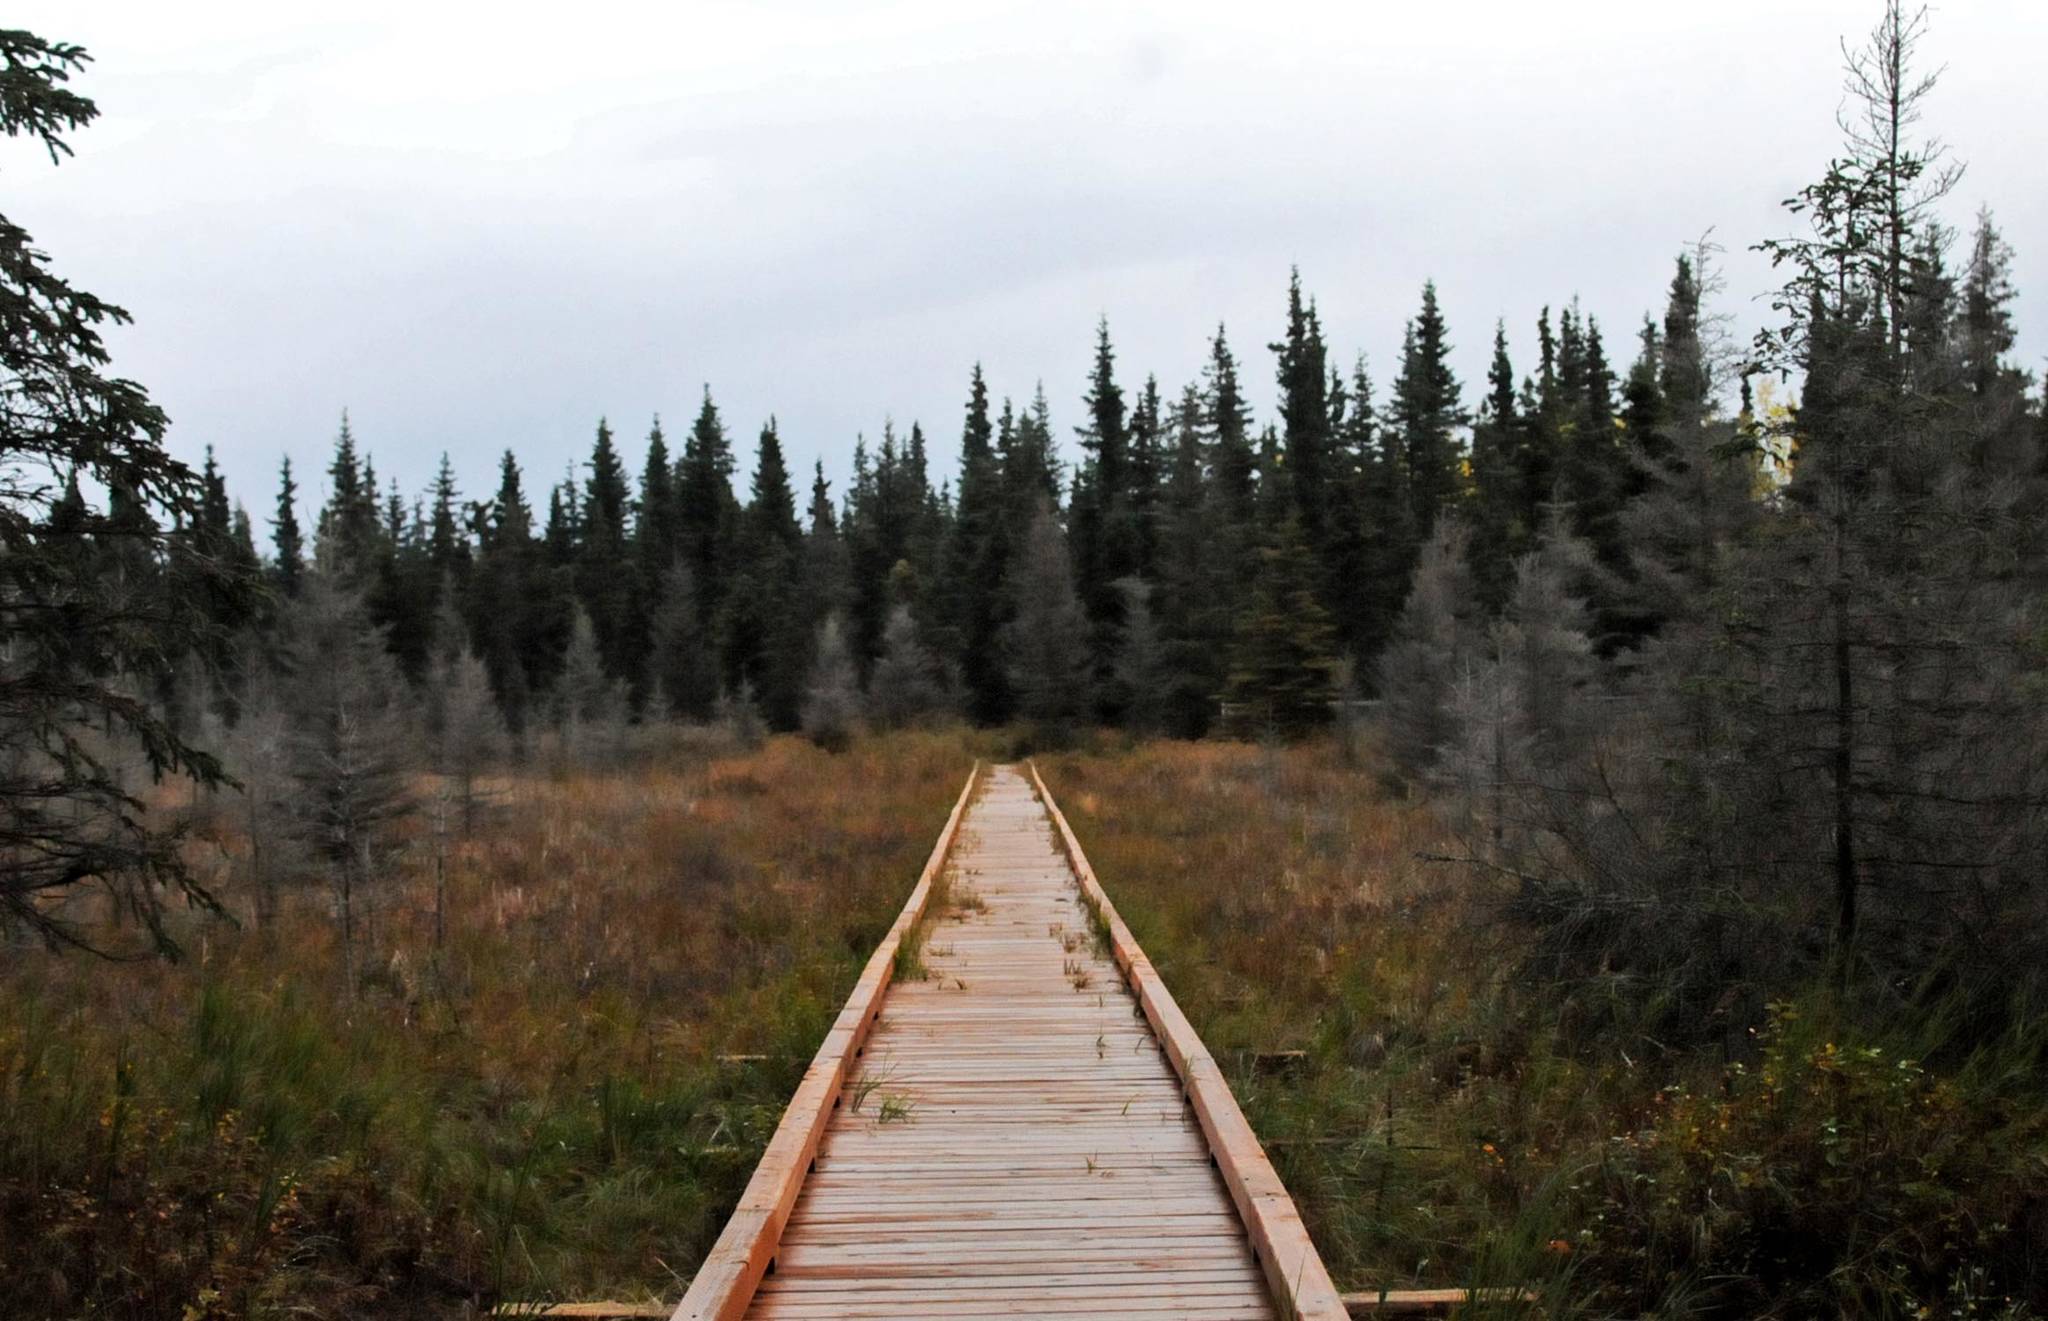 A footbridge stretches out over wetlands on the Ryan’s Creek trail among foliage in full fall colors Thursday, Sept. 28, 2017 in Kenai, Alaska. The Ryan’s Creek trail, which runs for about 1.3 miles parallel to Trading Bay Road and connects the Kenai Spur Highway and Marathon Road near Daubenspeck Family Park, was extended in 2013. The city of Kenai maintains a network of pedestrian trails downtown, part of which features a disc golf course in the park near the Kenai Safeway. (Photo by Elizabeth Earl/Peninsula Clarion)